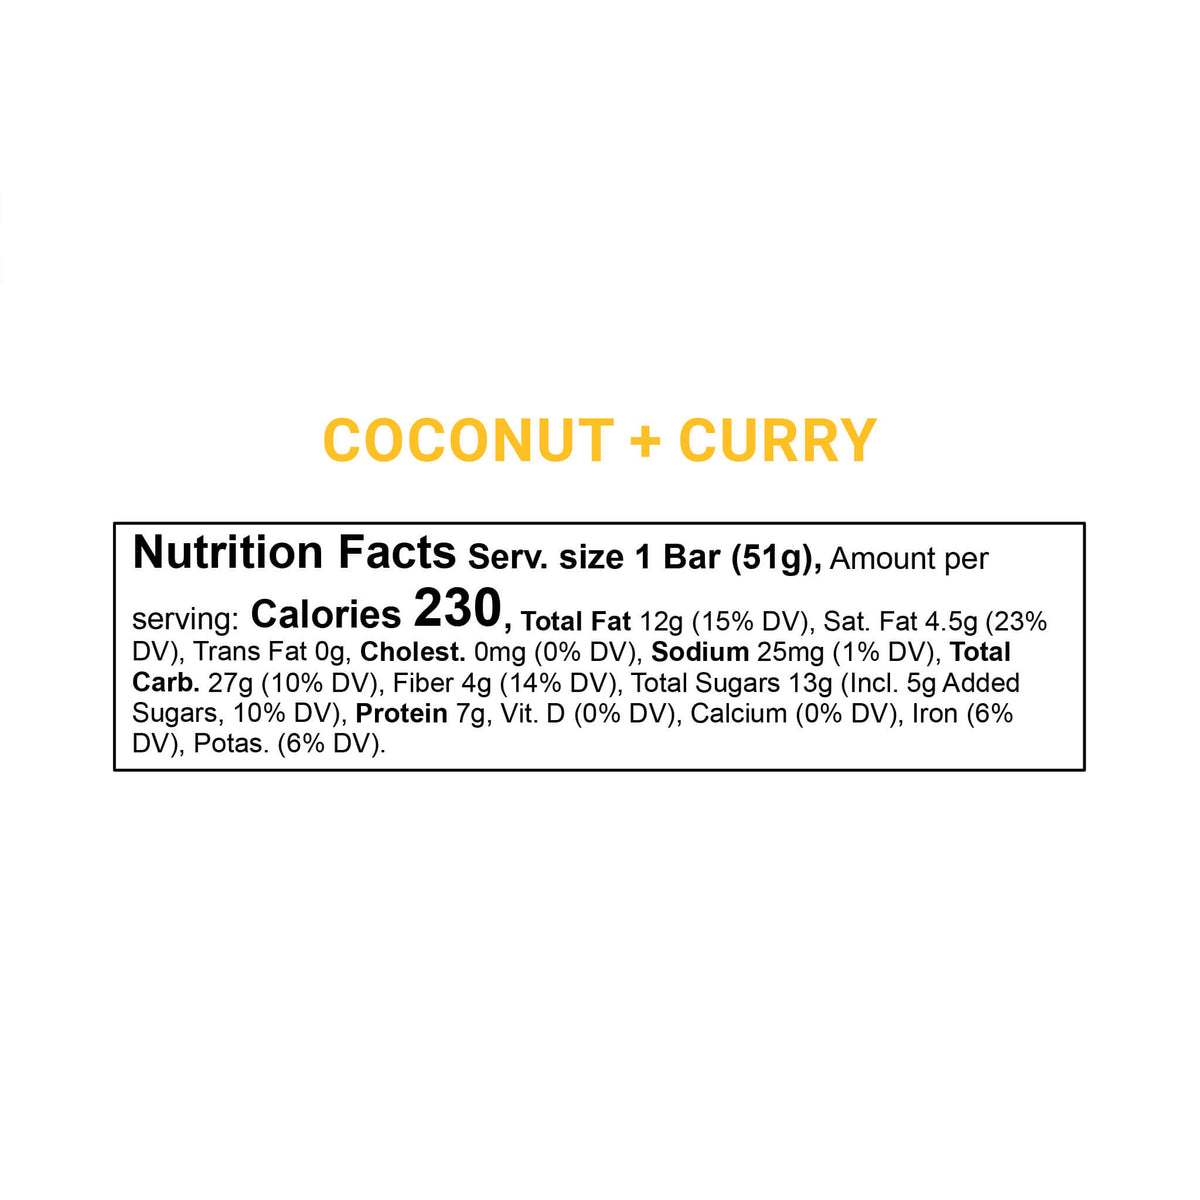 Coconut + Curry